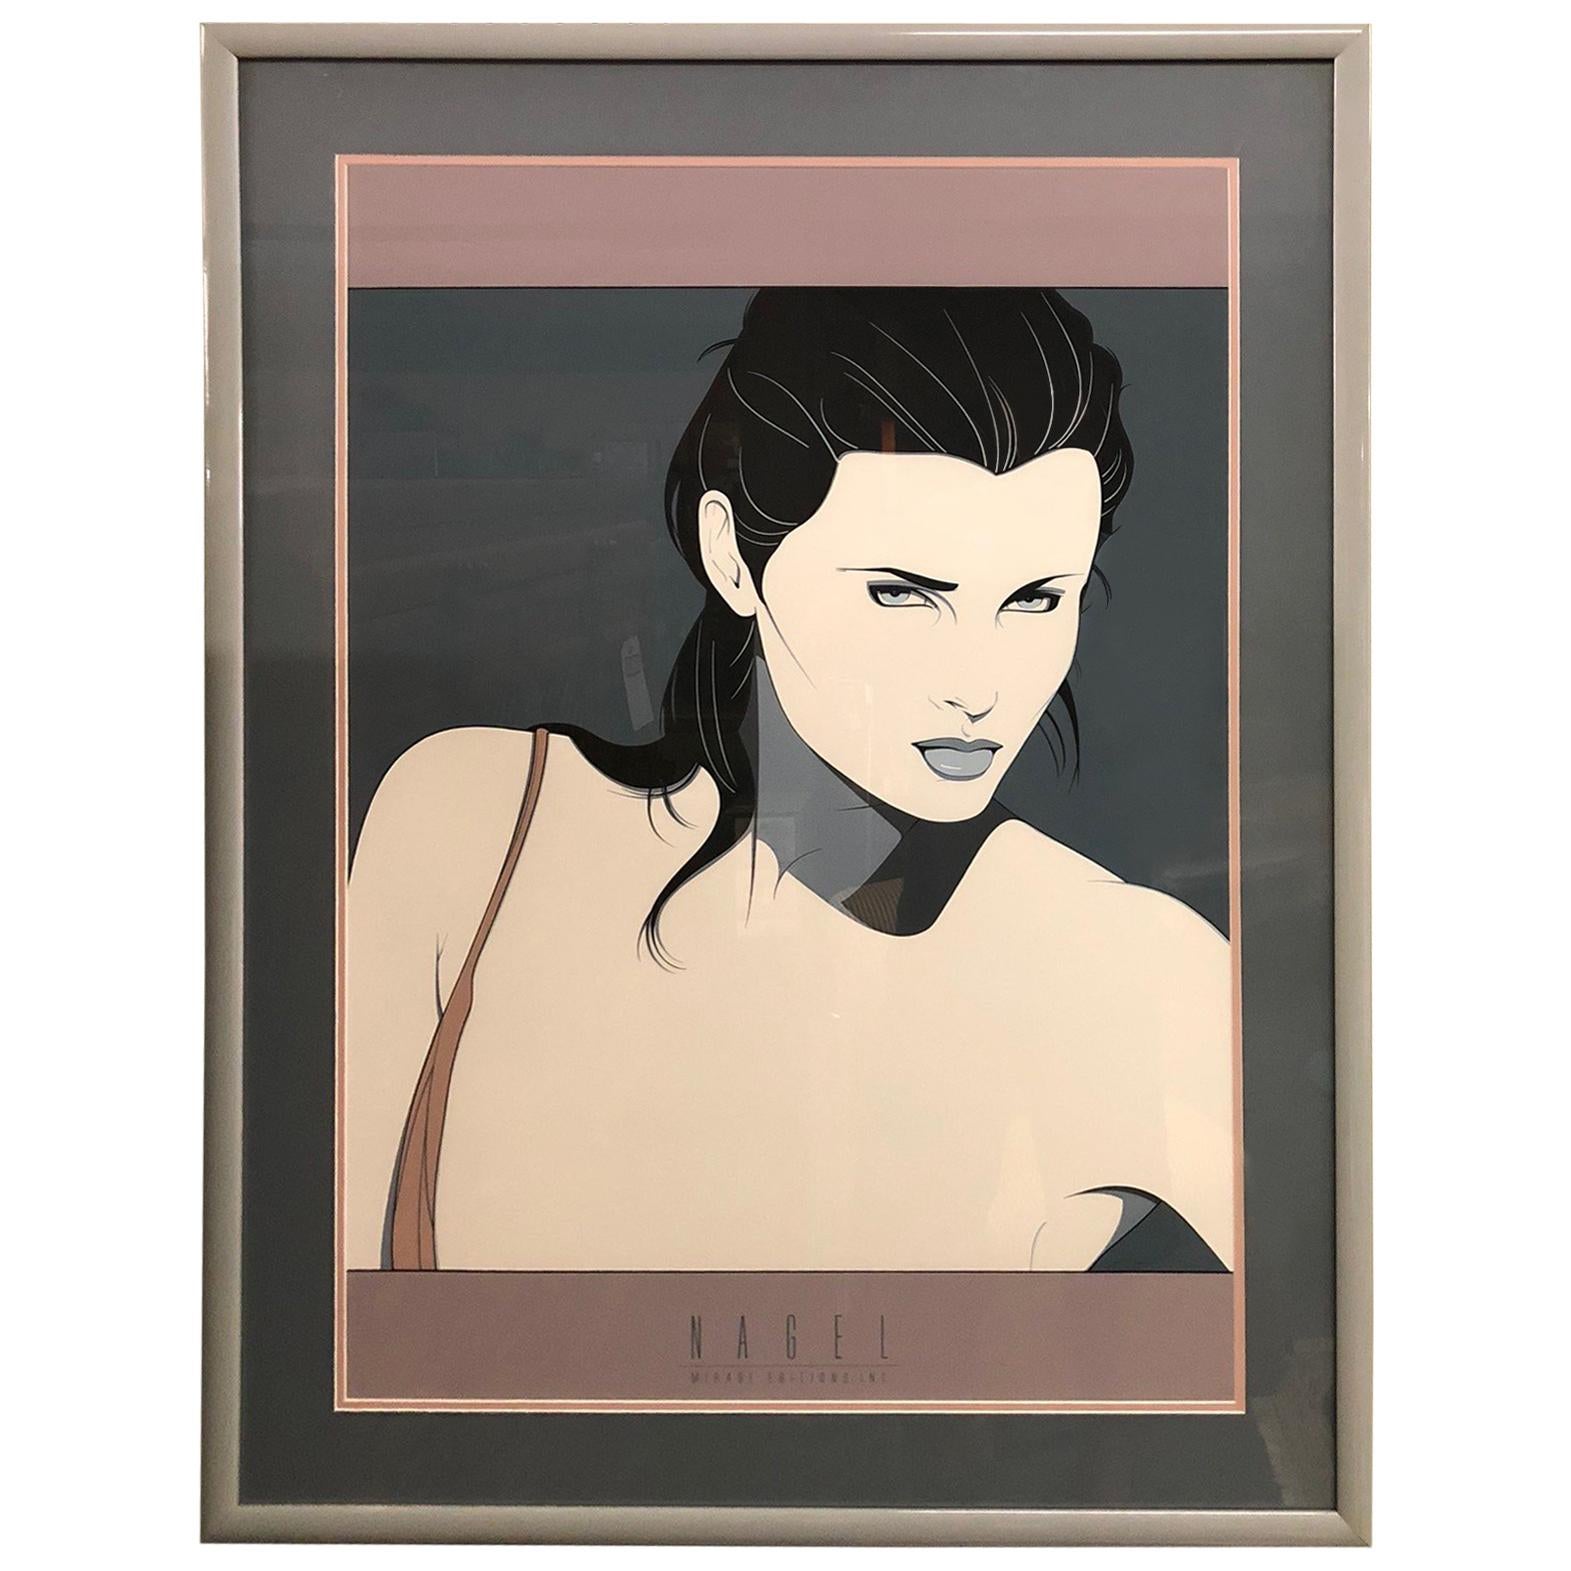 Limited Edition Serigraph by Patrick Nagel